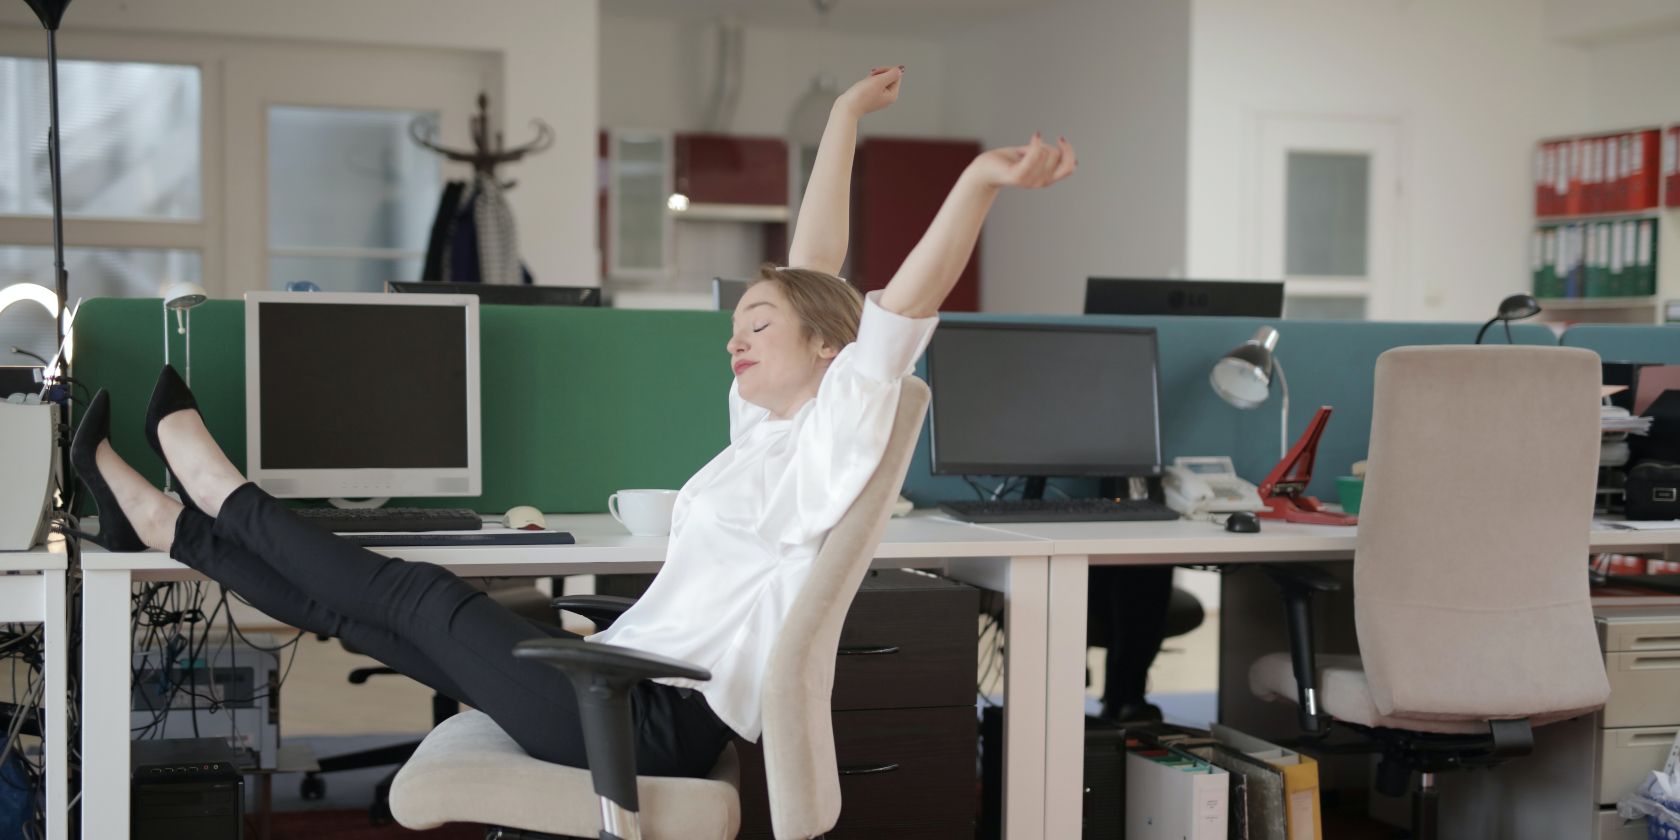 Ecstatic female employee in a tech office with her hands in the air and legs resting on the work table surrounded by desktop workstations.